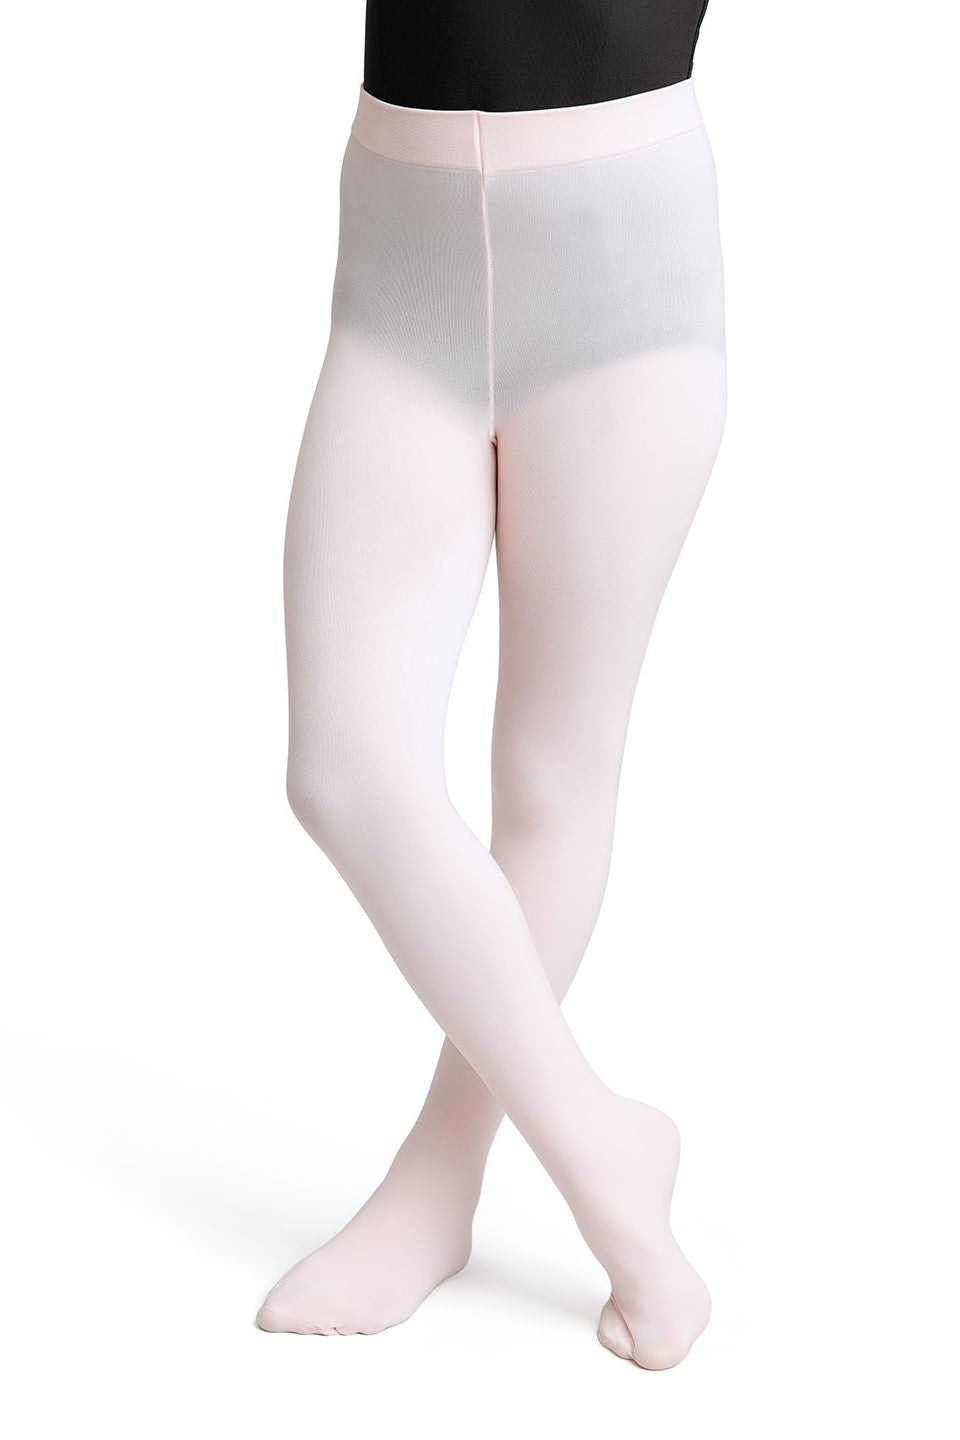 Capezio Ultra Soft Footed Tights Child Size 8-12yrs 1915C